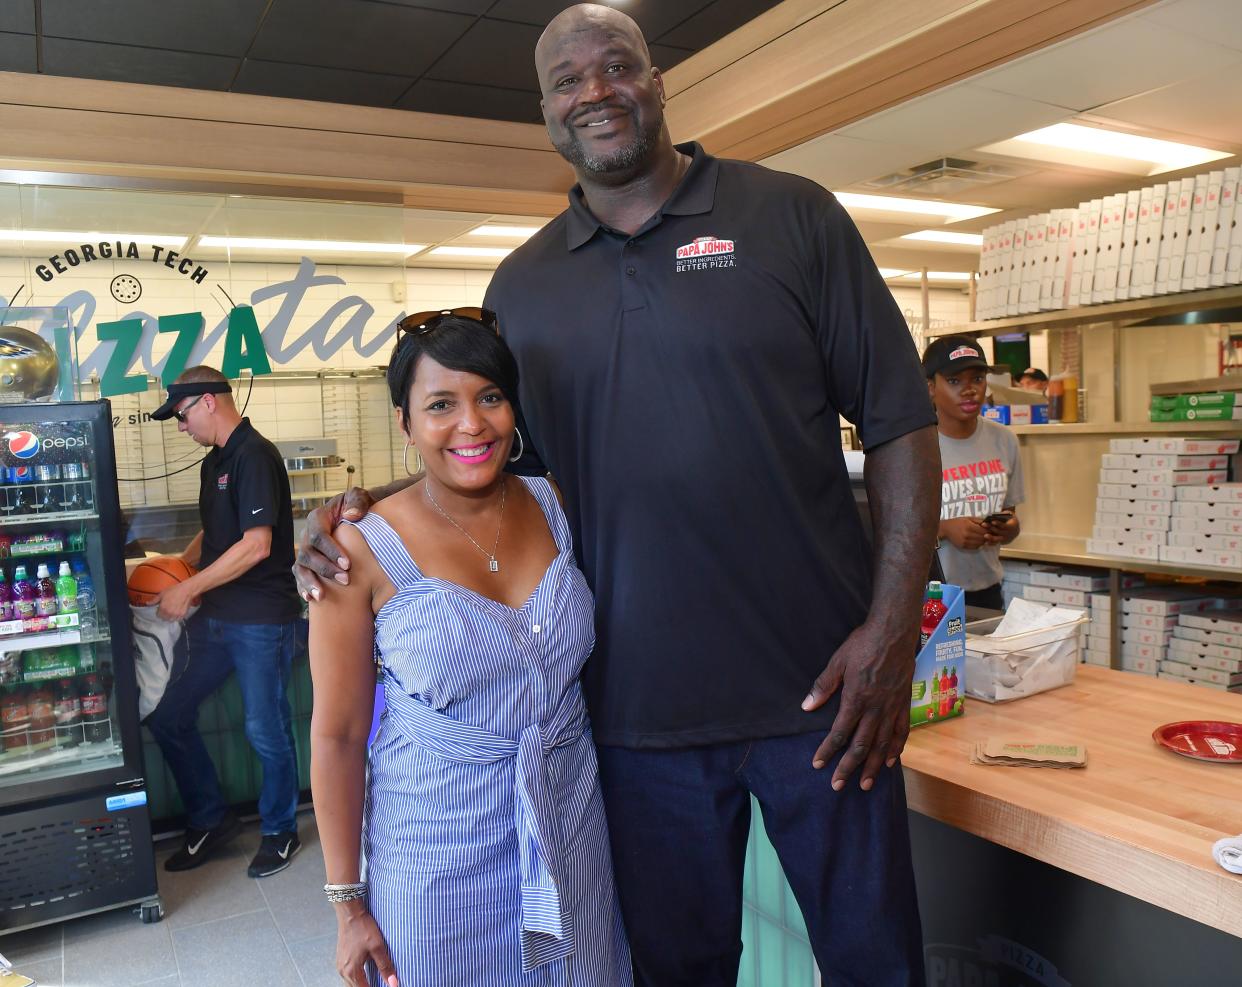 Shaquille O'Neal & Papa Johns